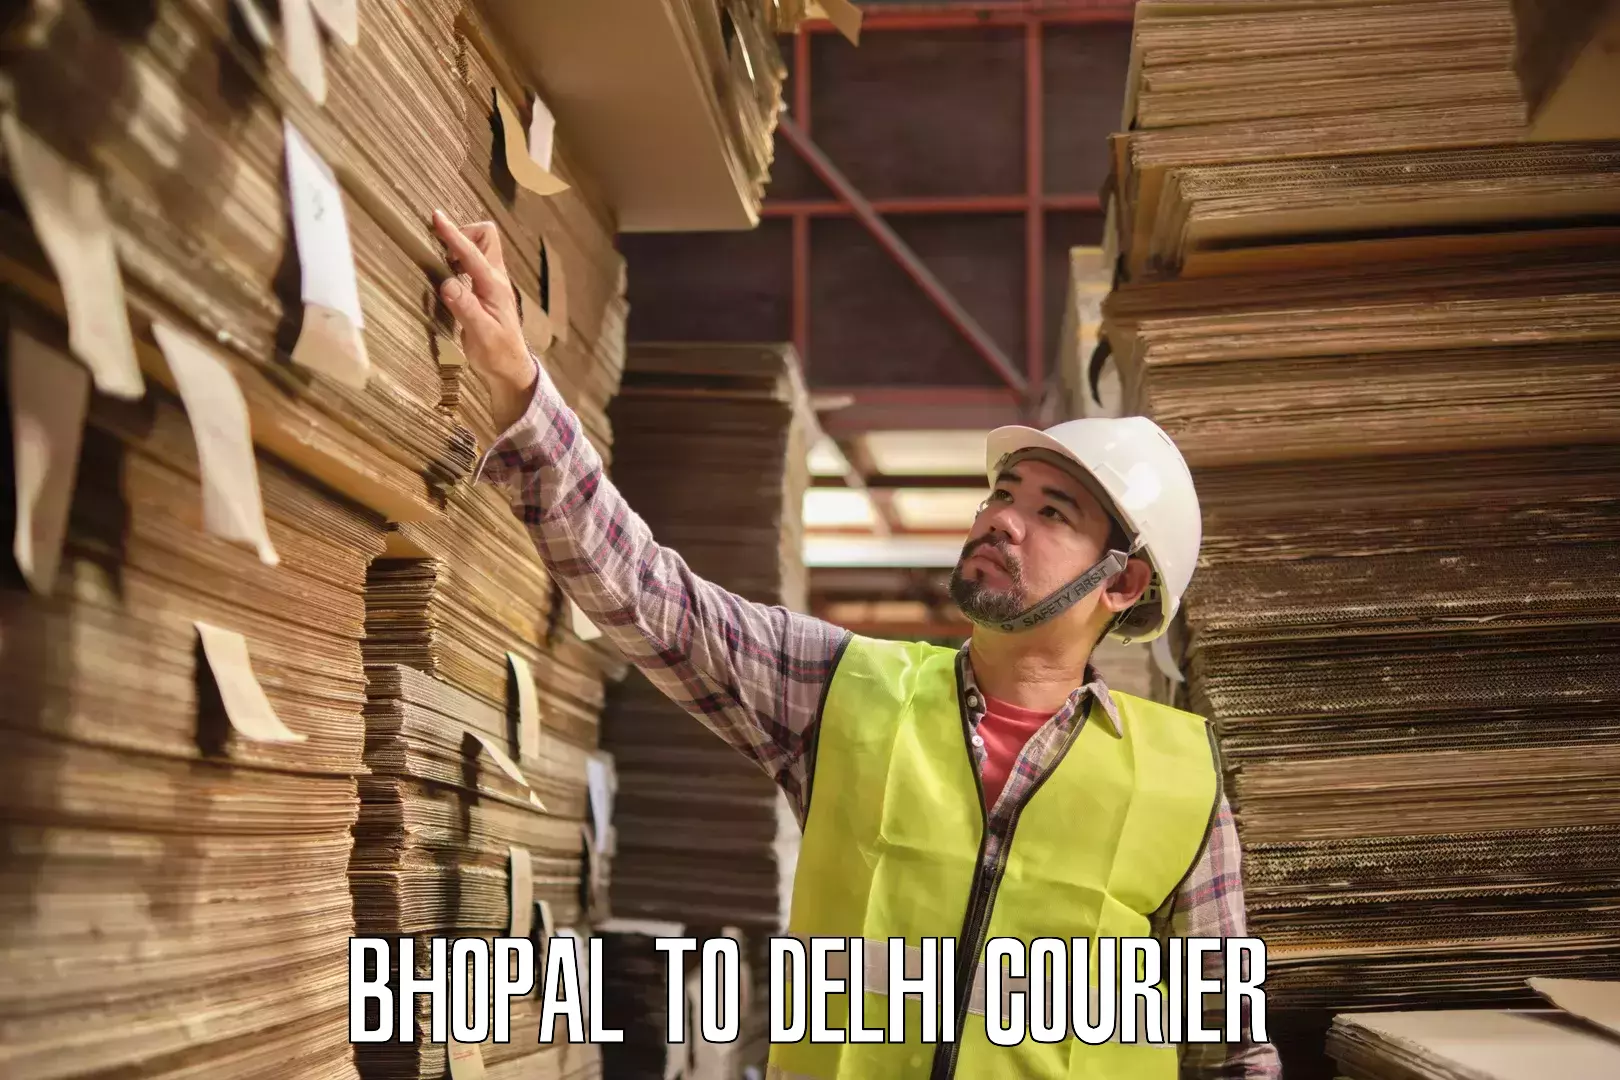 Efficient shipping platforms Bhopal to NCR